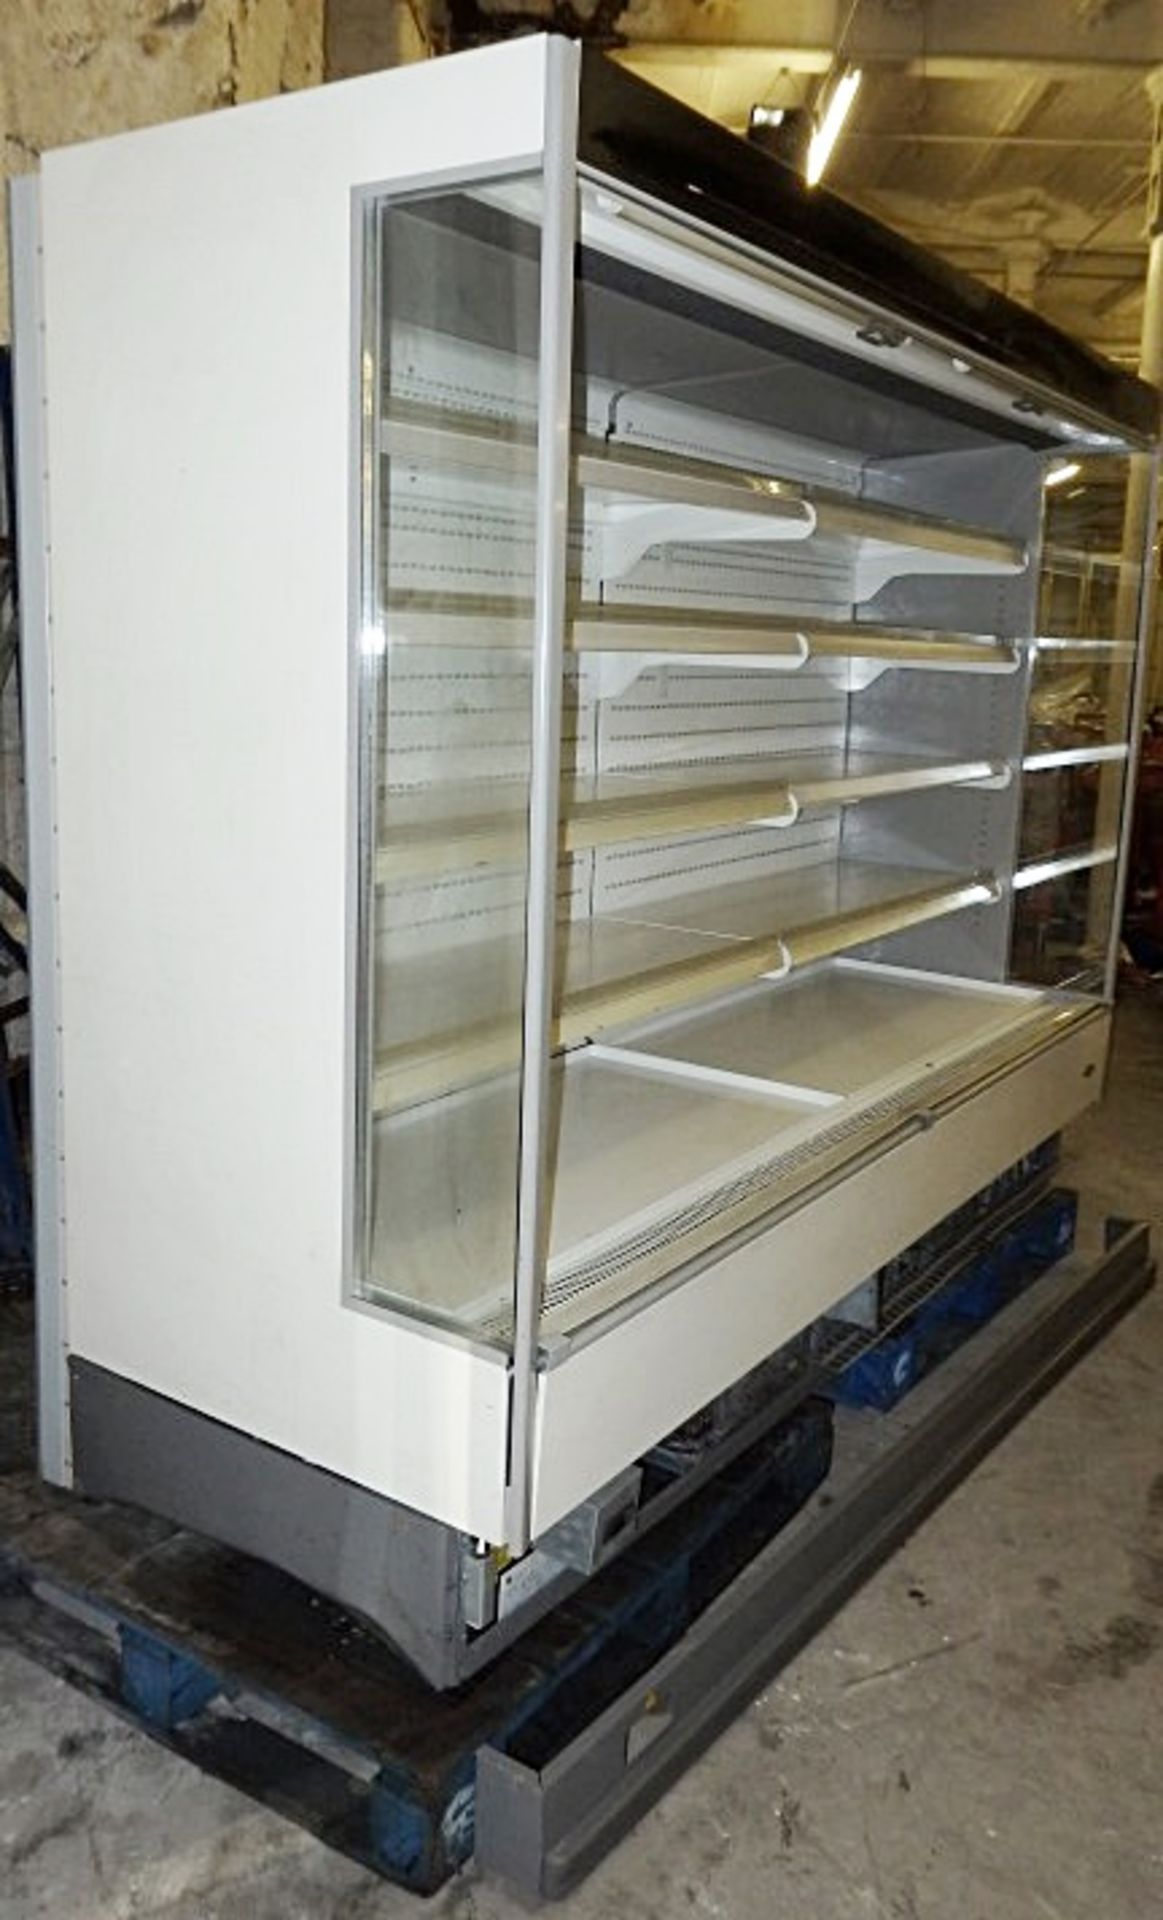 1 x Carrier Branded 2.5m Wide Illumiated Display Chiller With Blind And Adjustable Shelving - - Image 2 of 9